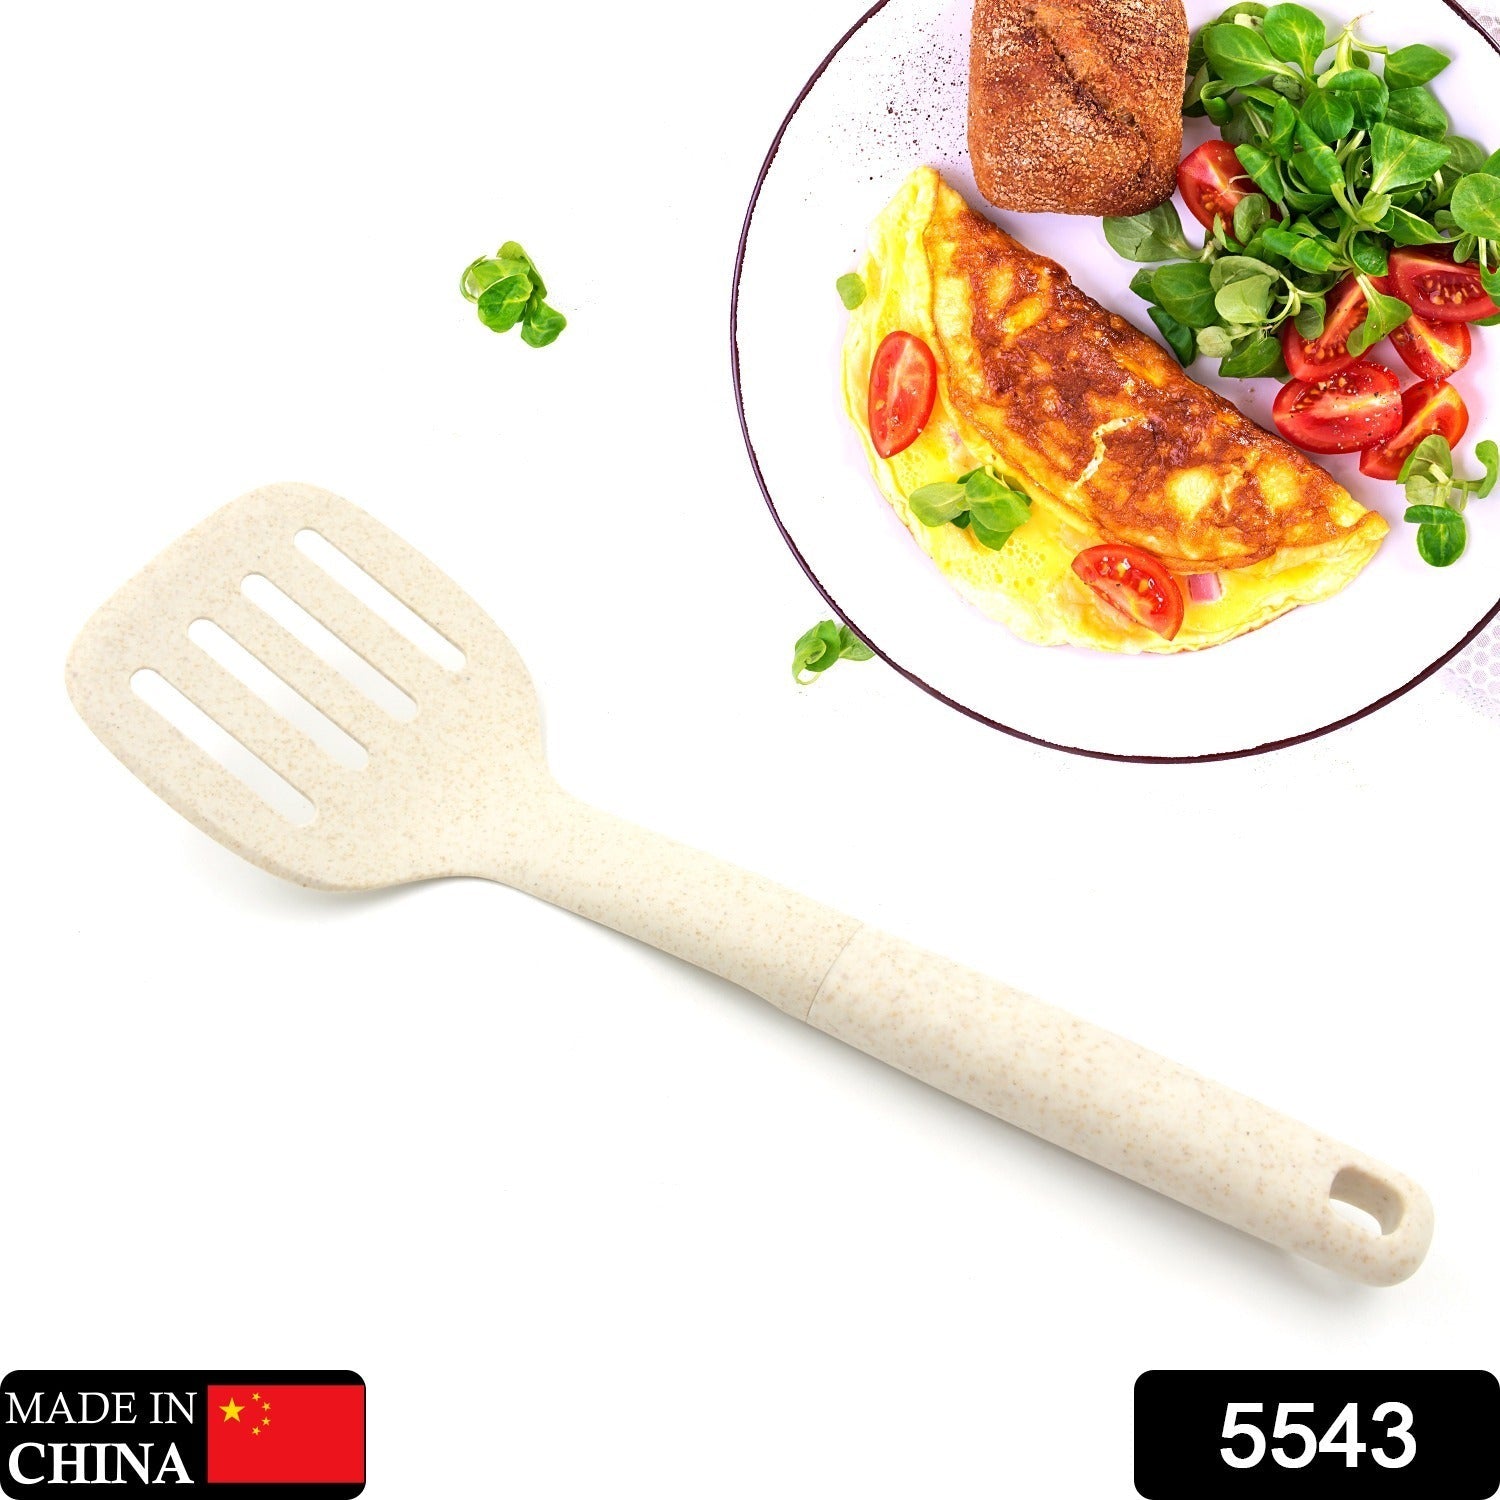 Plastic Kitchen Accessories Skimmer, Spatula Spoon & Soup Spoon Heat Resistant  Non Stick Spoons Kitchen Cookware Items Heat Resistant Plastic Kitchen Utensils for Cooking, BPA FREE Gadgets for Non-Stick Cookware (1 Pc )